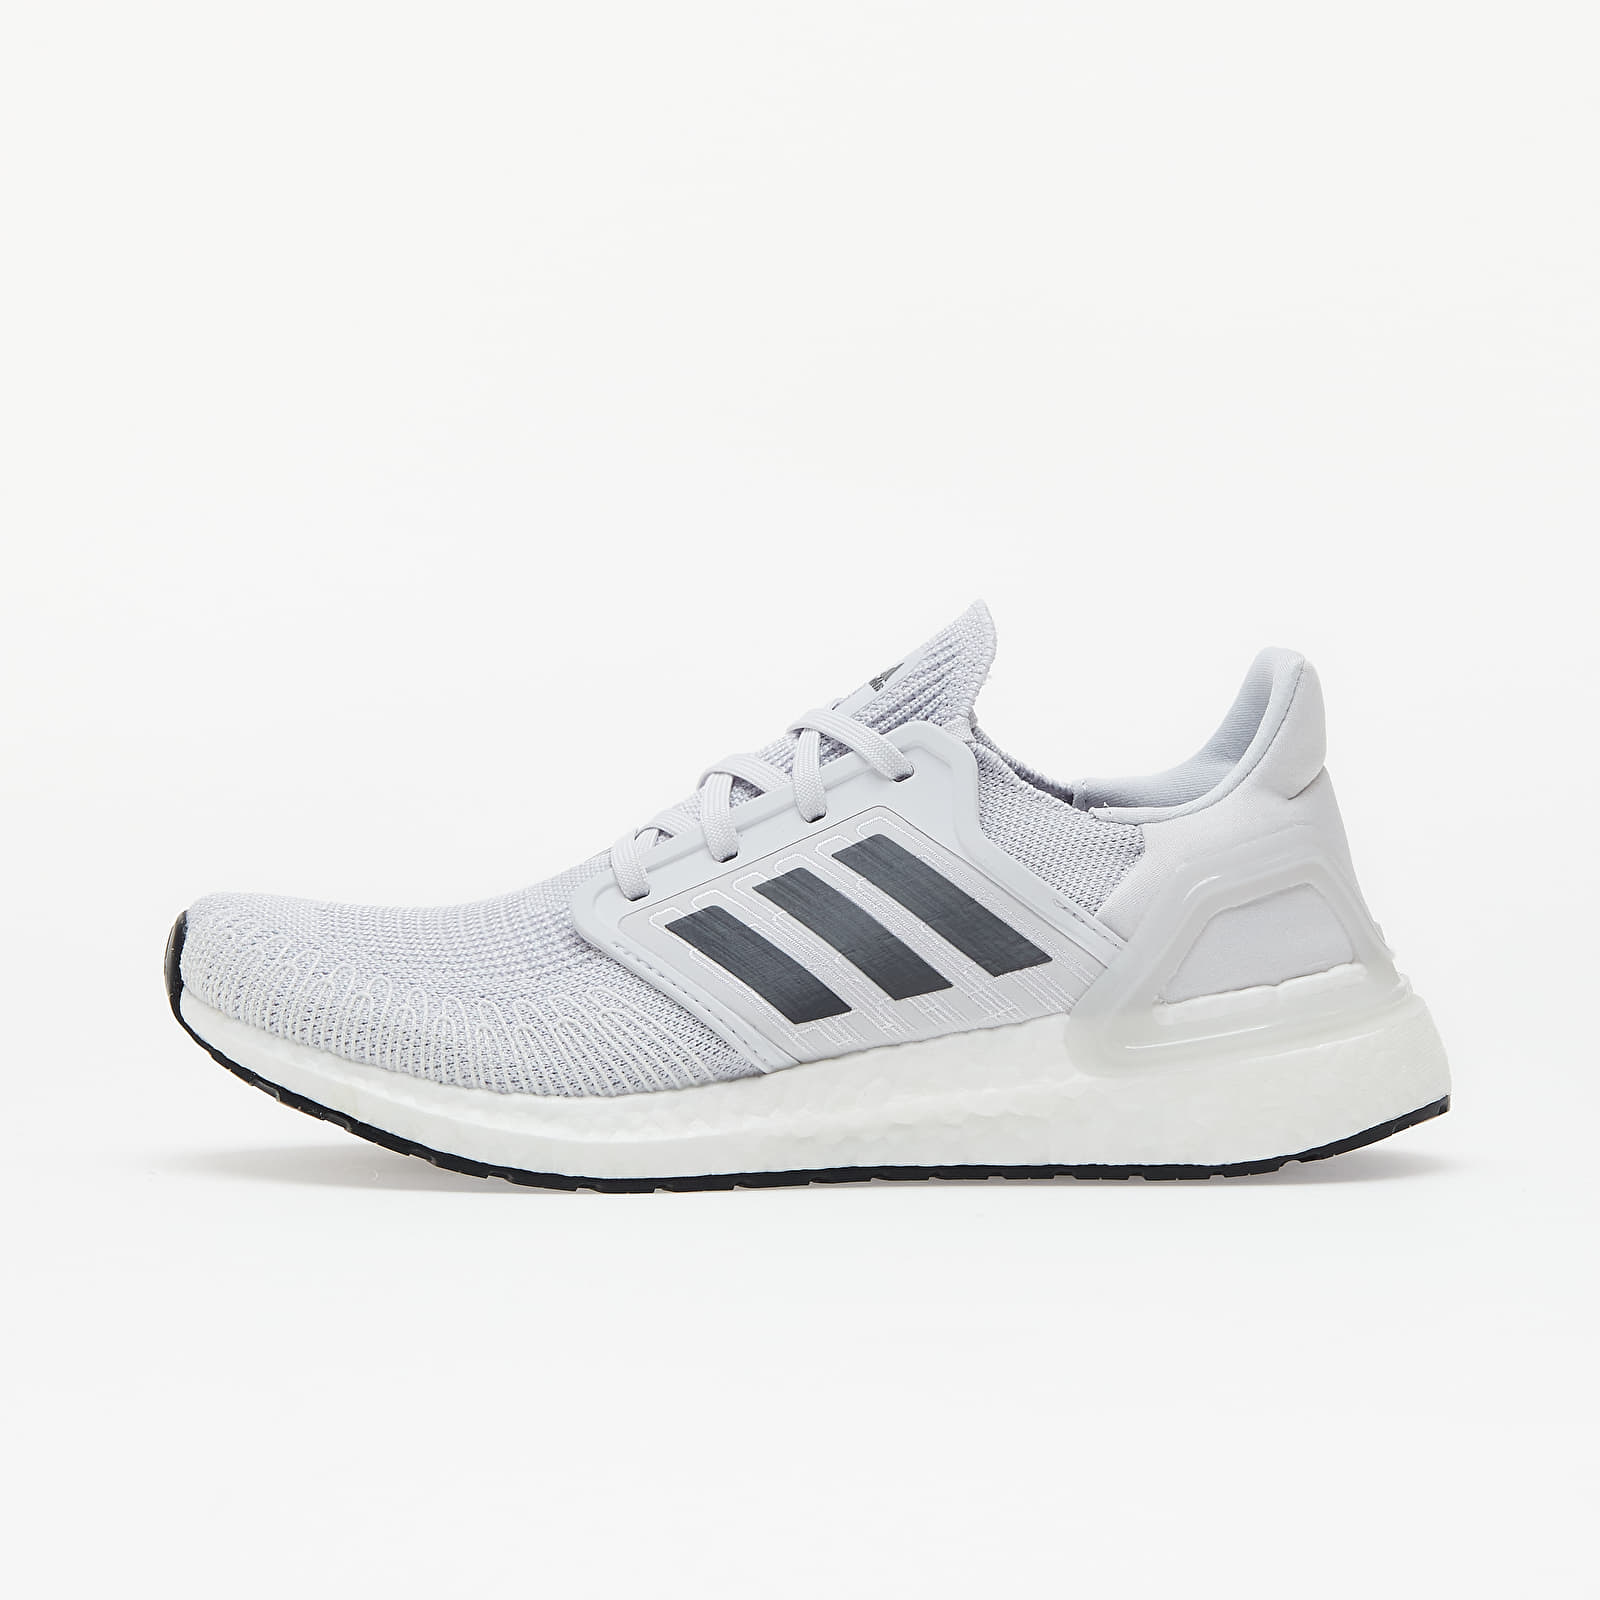 Chaussures et baskets homme adidas UltraBOOST 20 Dash Grey/ Grey Five/ Solid Red